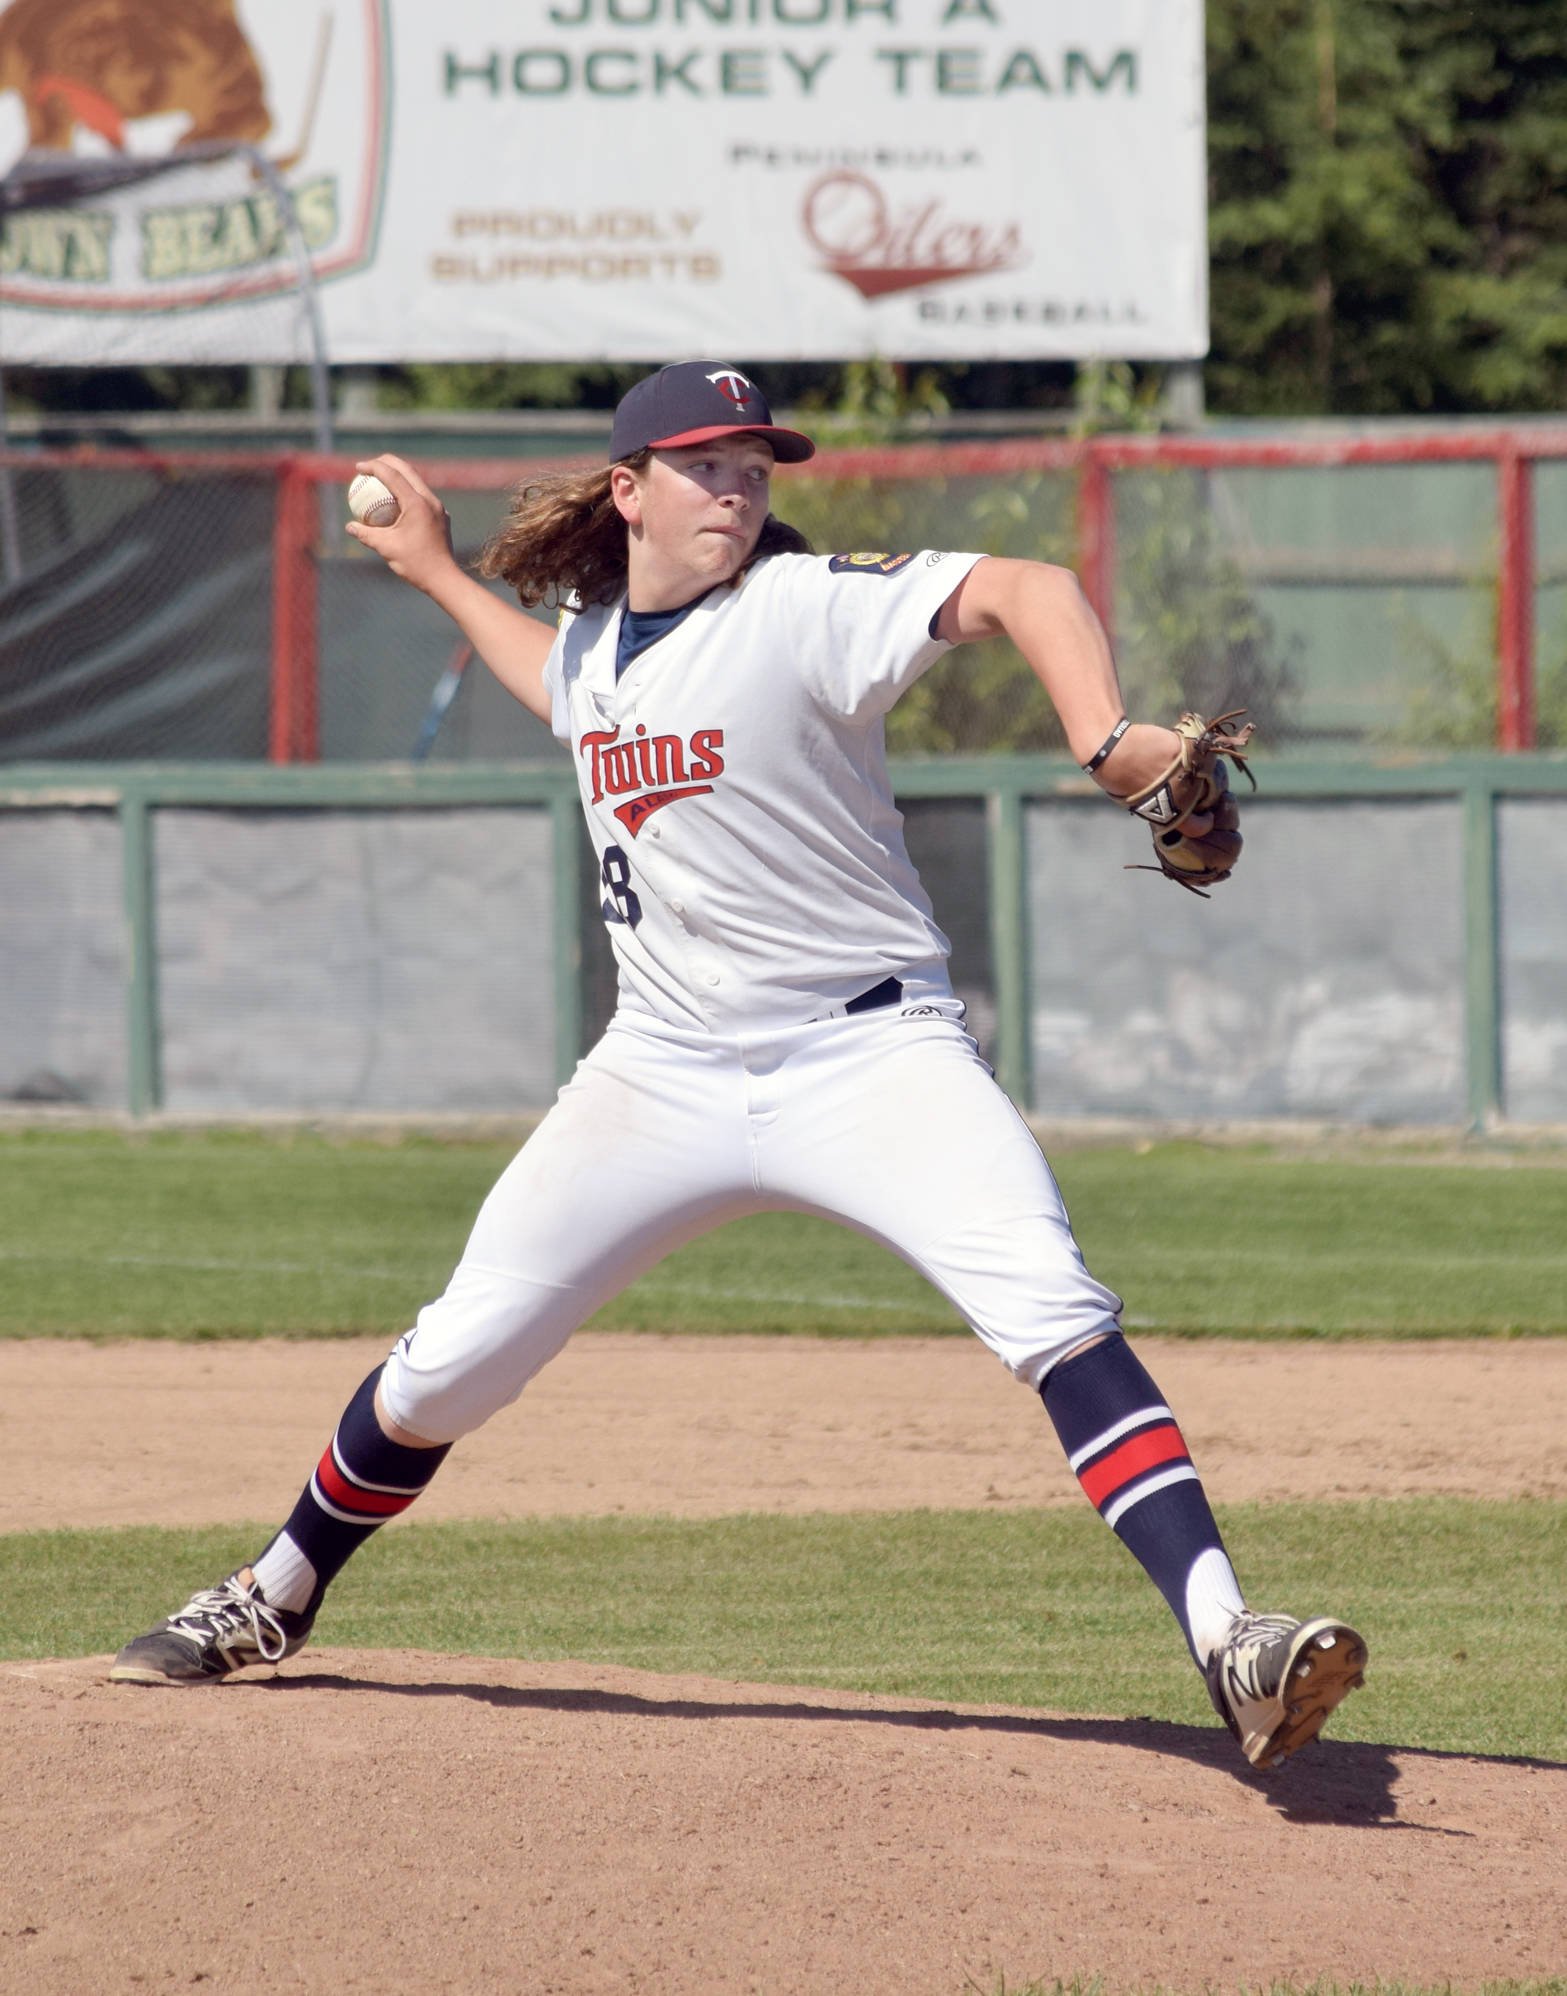 Twins starter Logan Smith delivers to East on Thursday, July 5, 2018, at Coral Seymour Memorial Park in Kenai. (Photo by Jeff Helminiak/Peninsula Clarion)